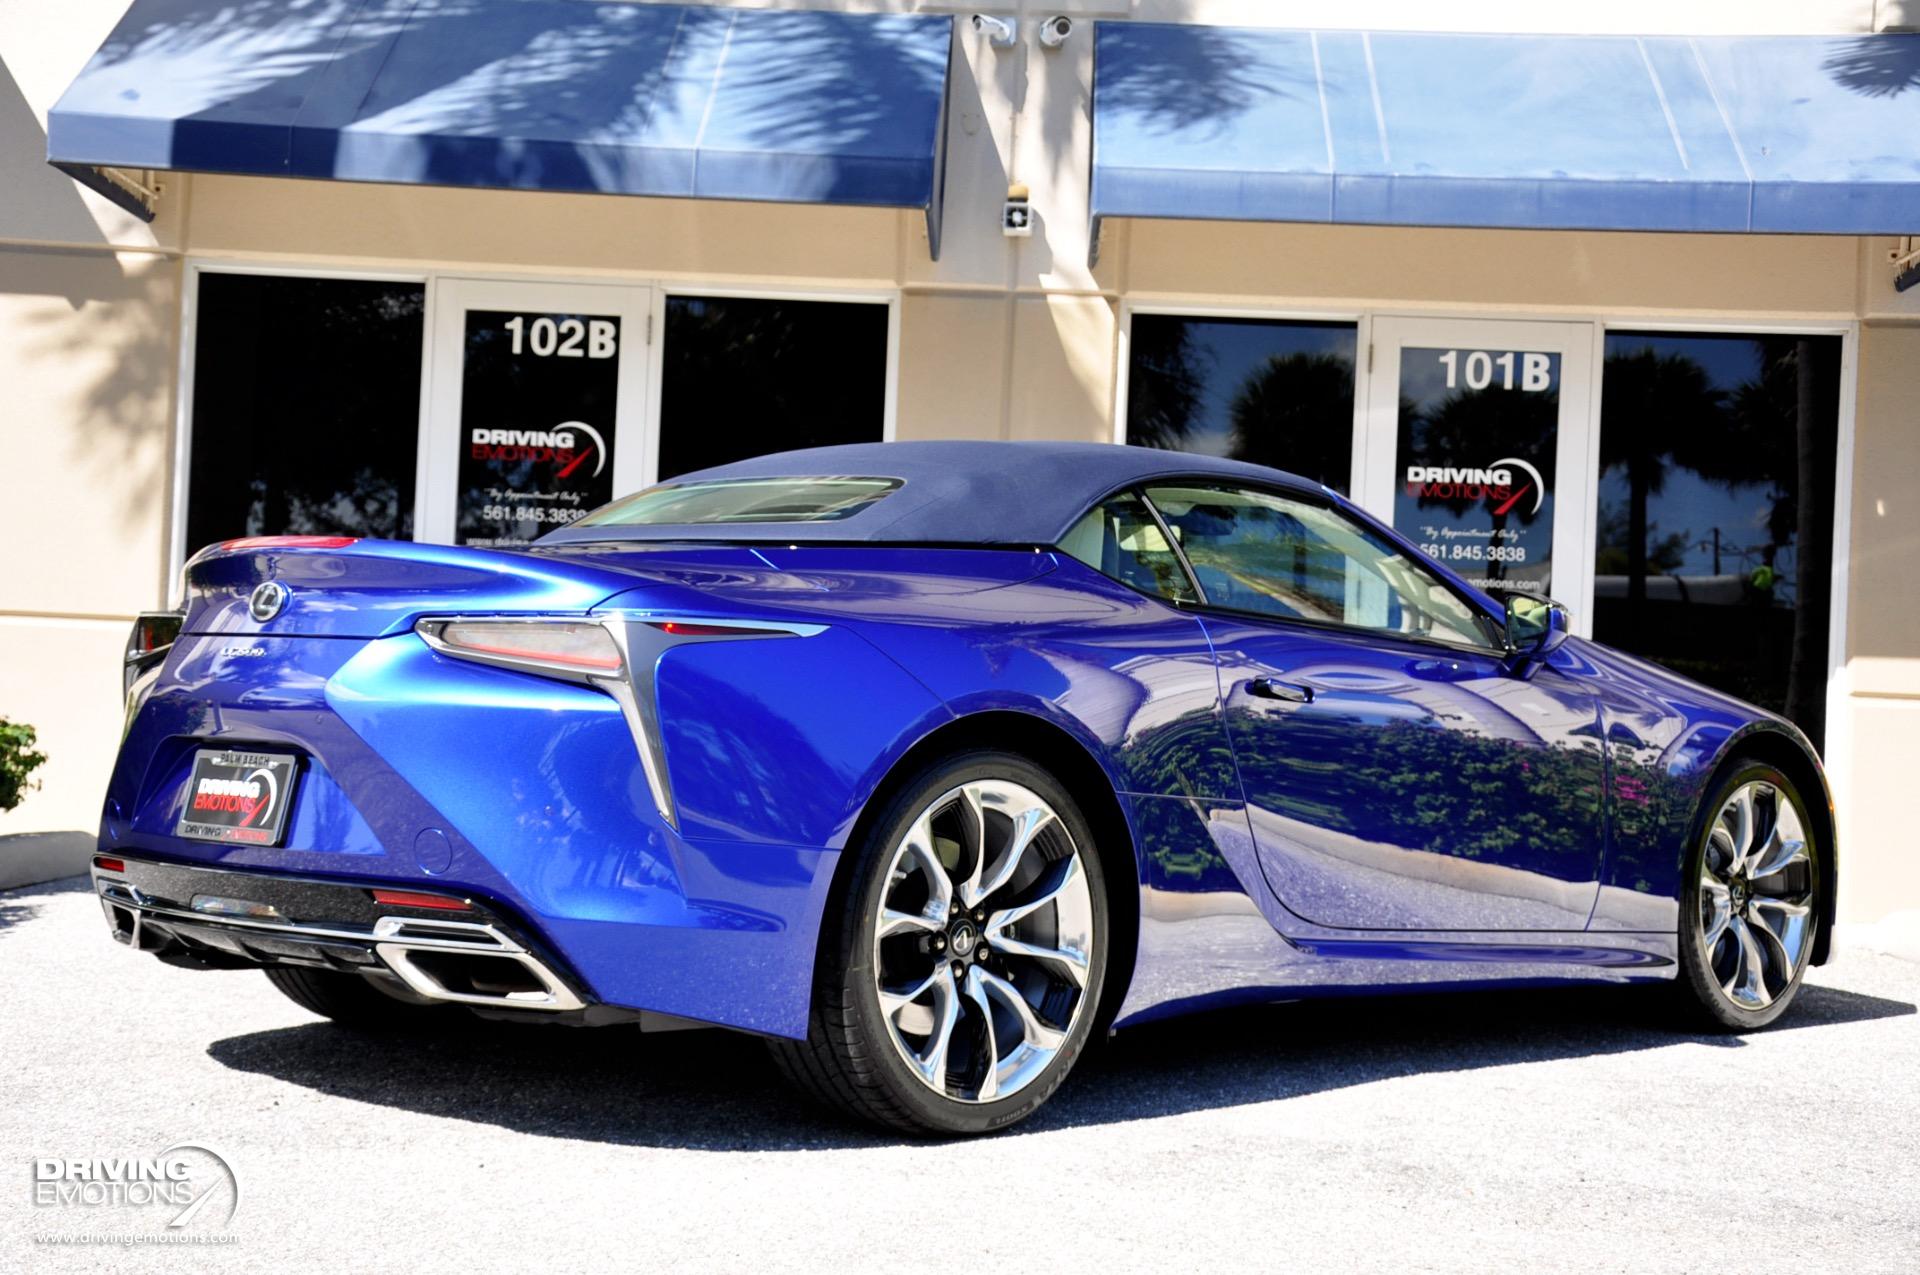 Used 2021 Lexus LC 500 Convertible Inspiration Series! Number 86 of 100 Built! RARE!! | Lake Park, FL